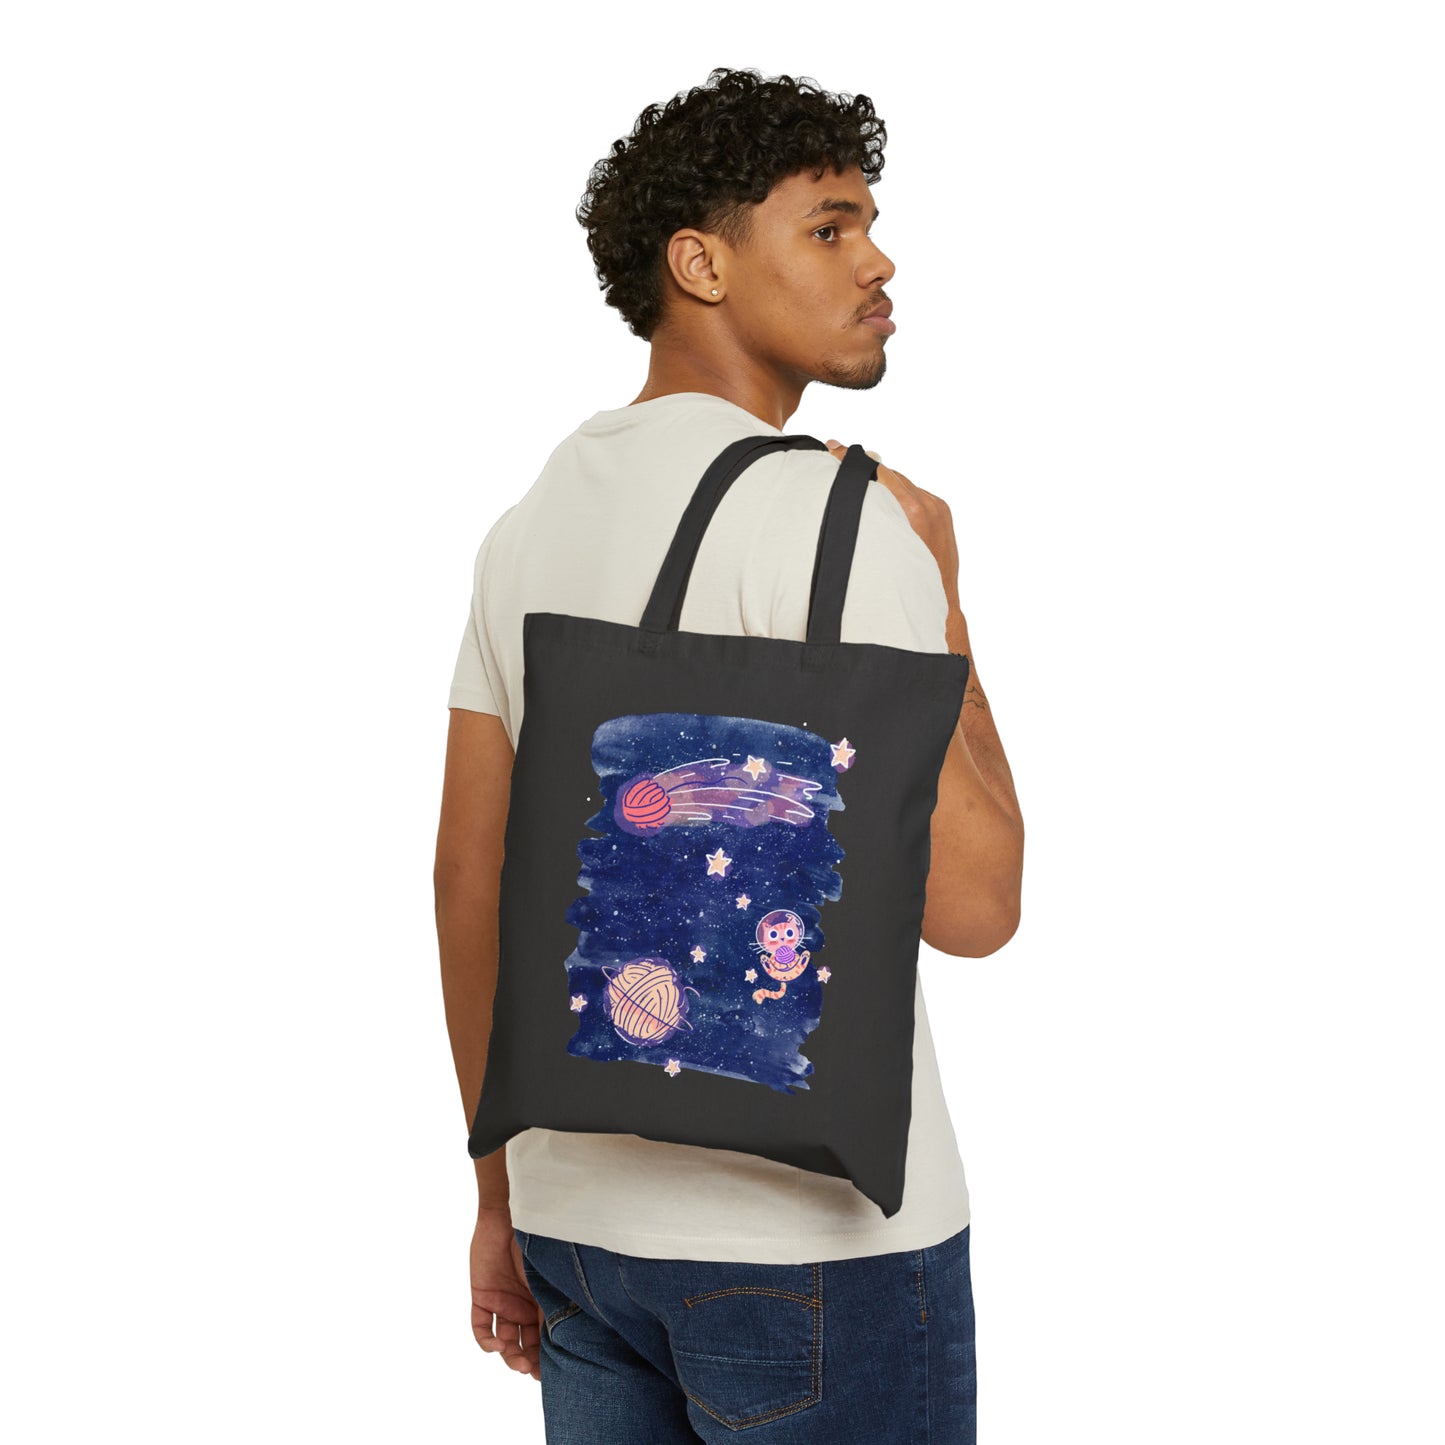 Cats In Space Canvas Tote Bag